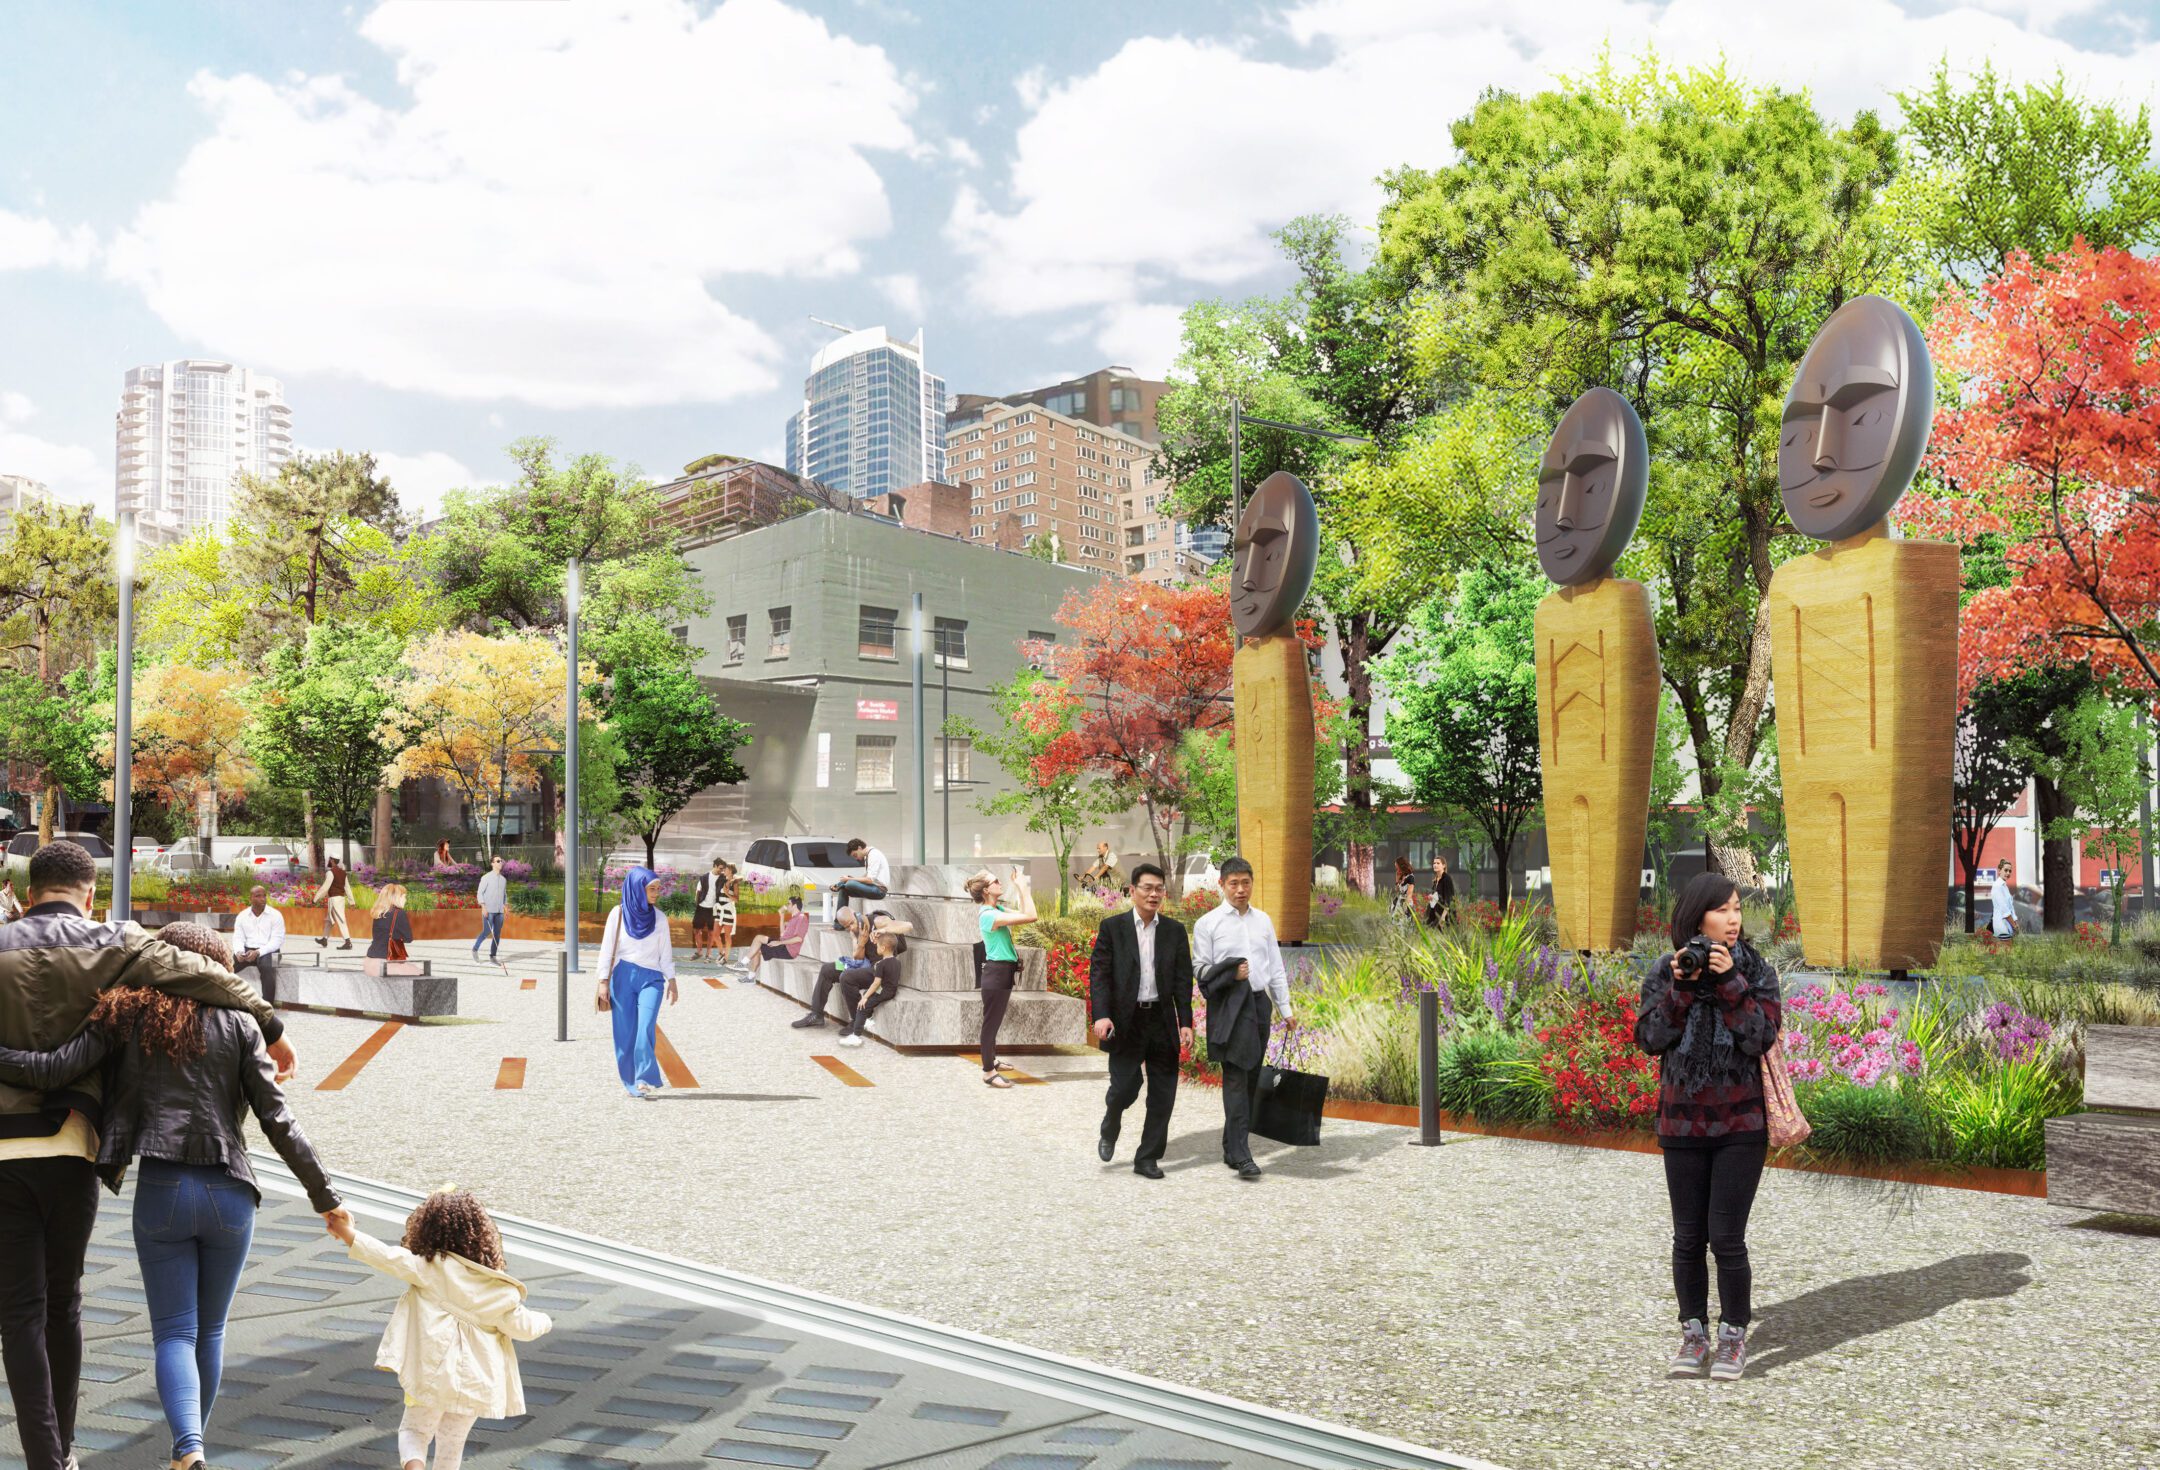 A rendering of the Park Promenade, by Union Street, featuring artwork and pedestrians strolling through the space.